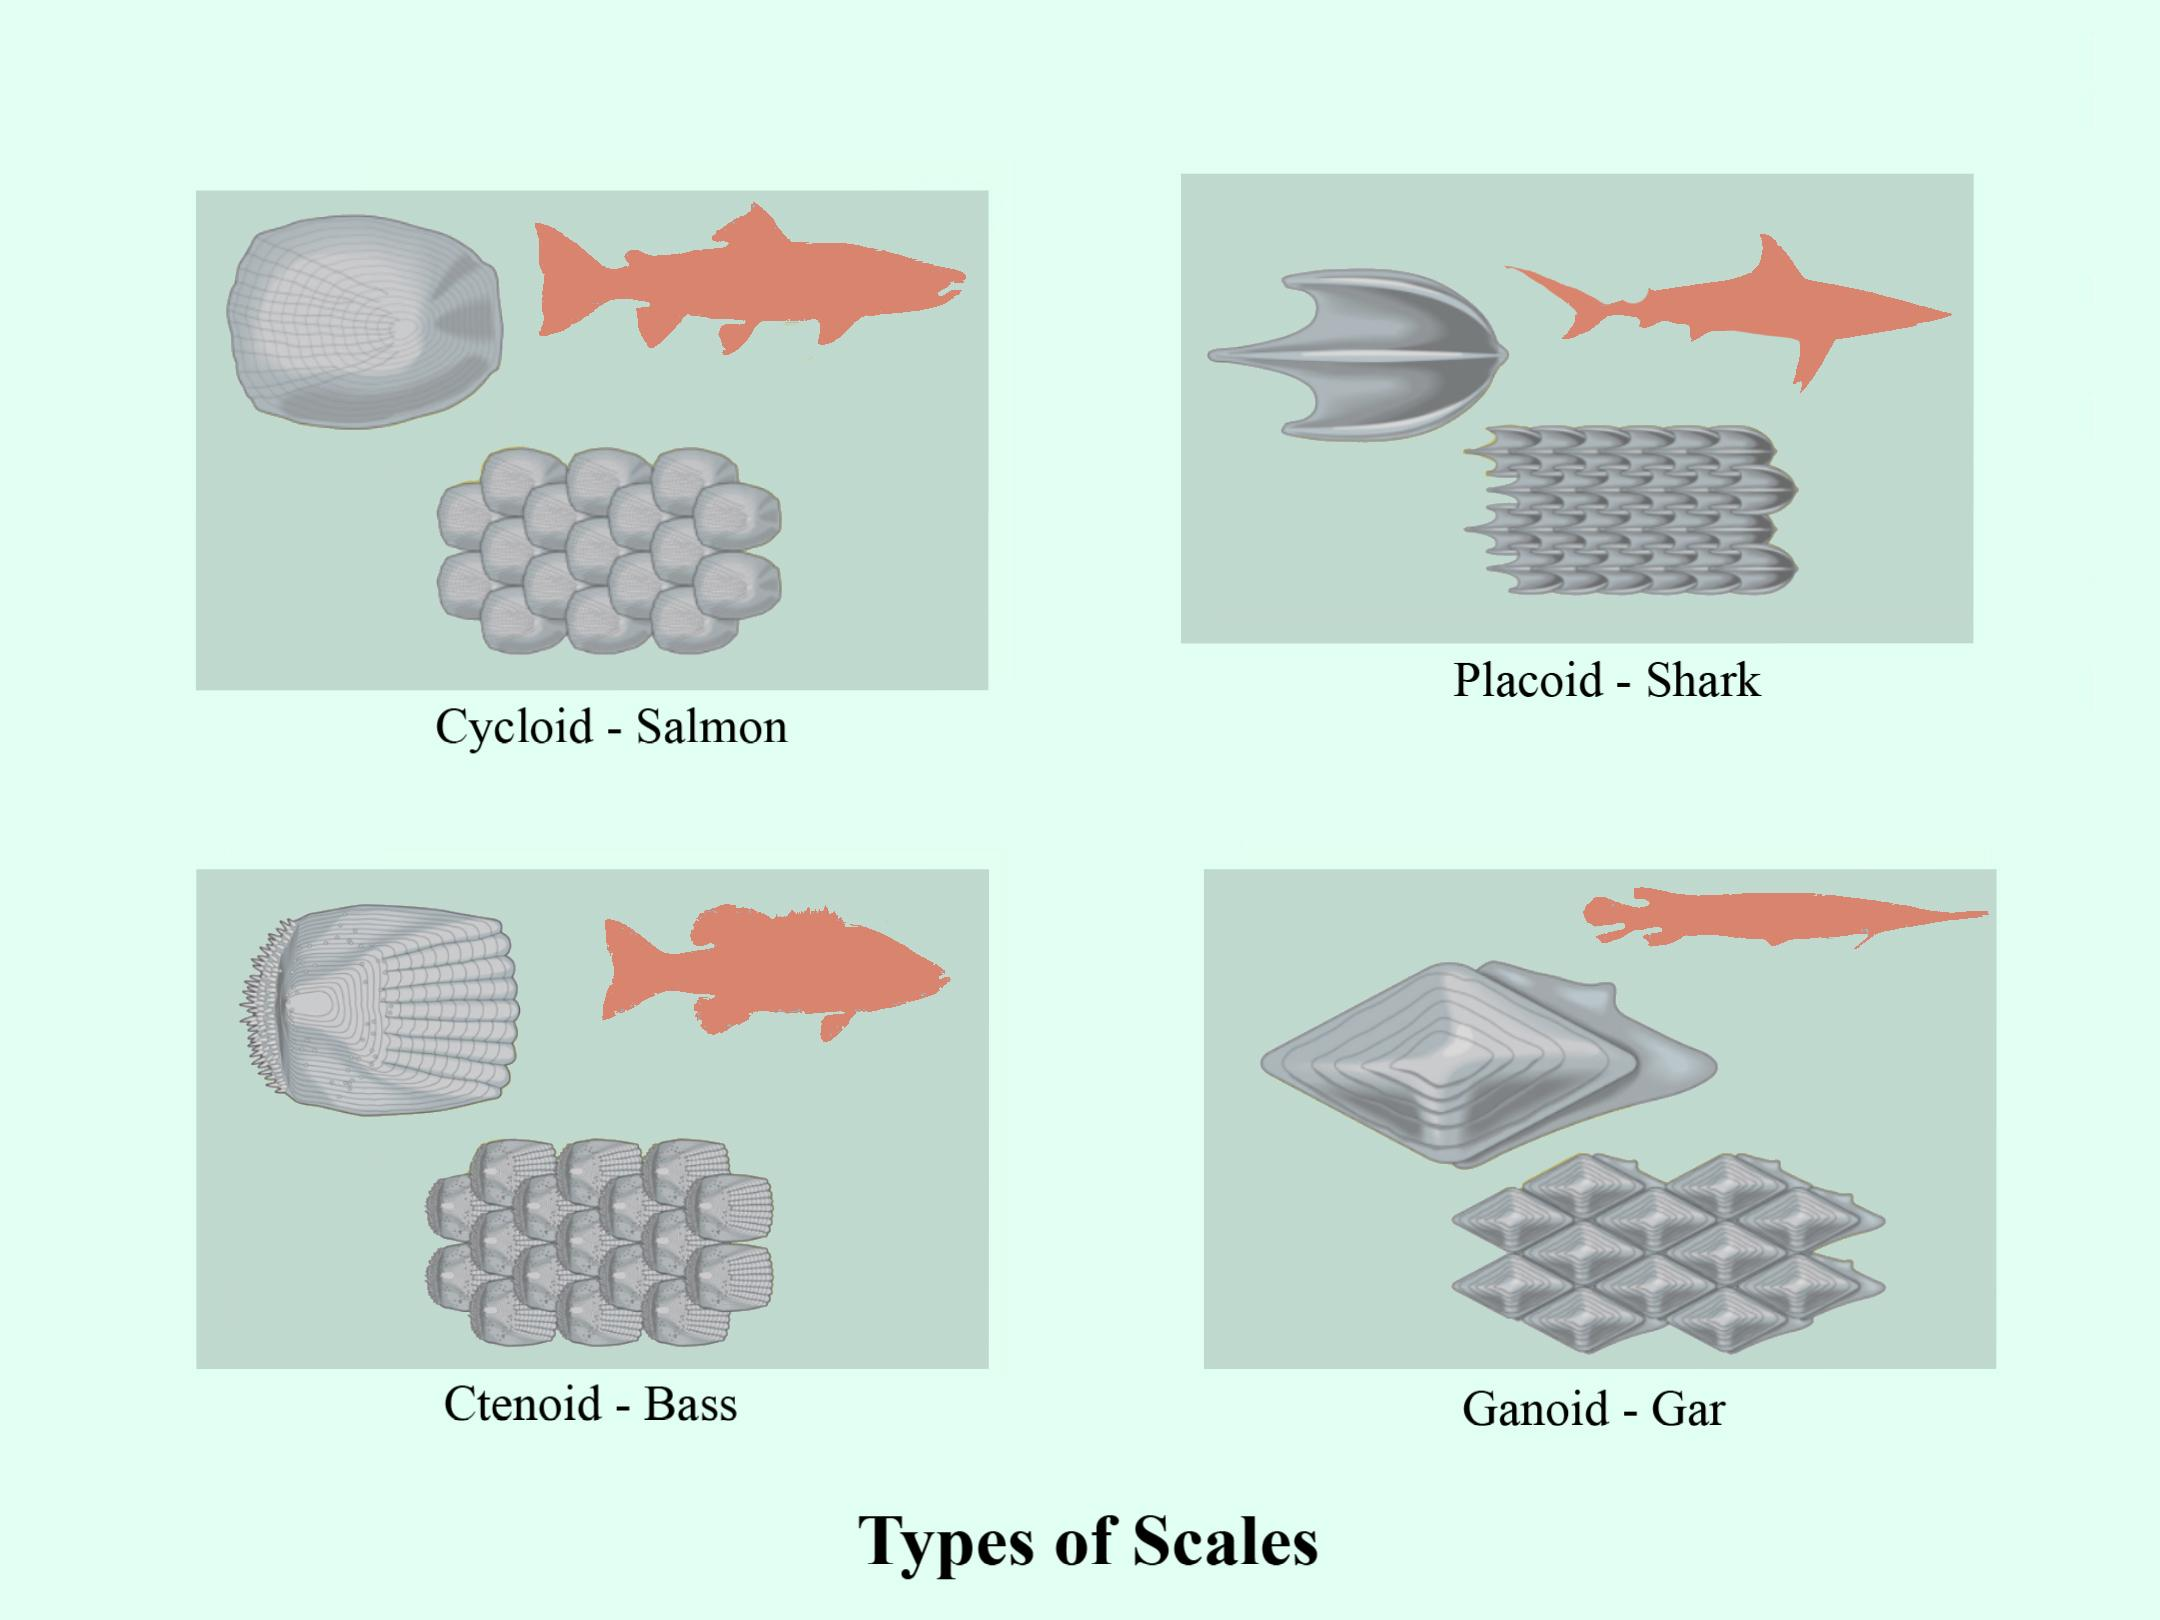 Which type of scales are found on the skin of cartilaginous fishes